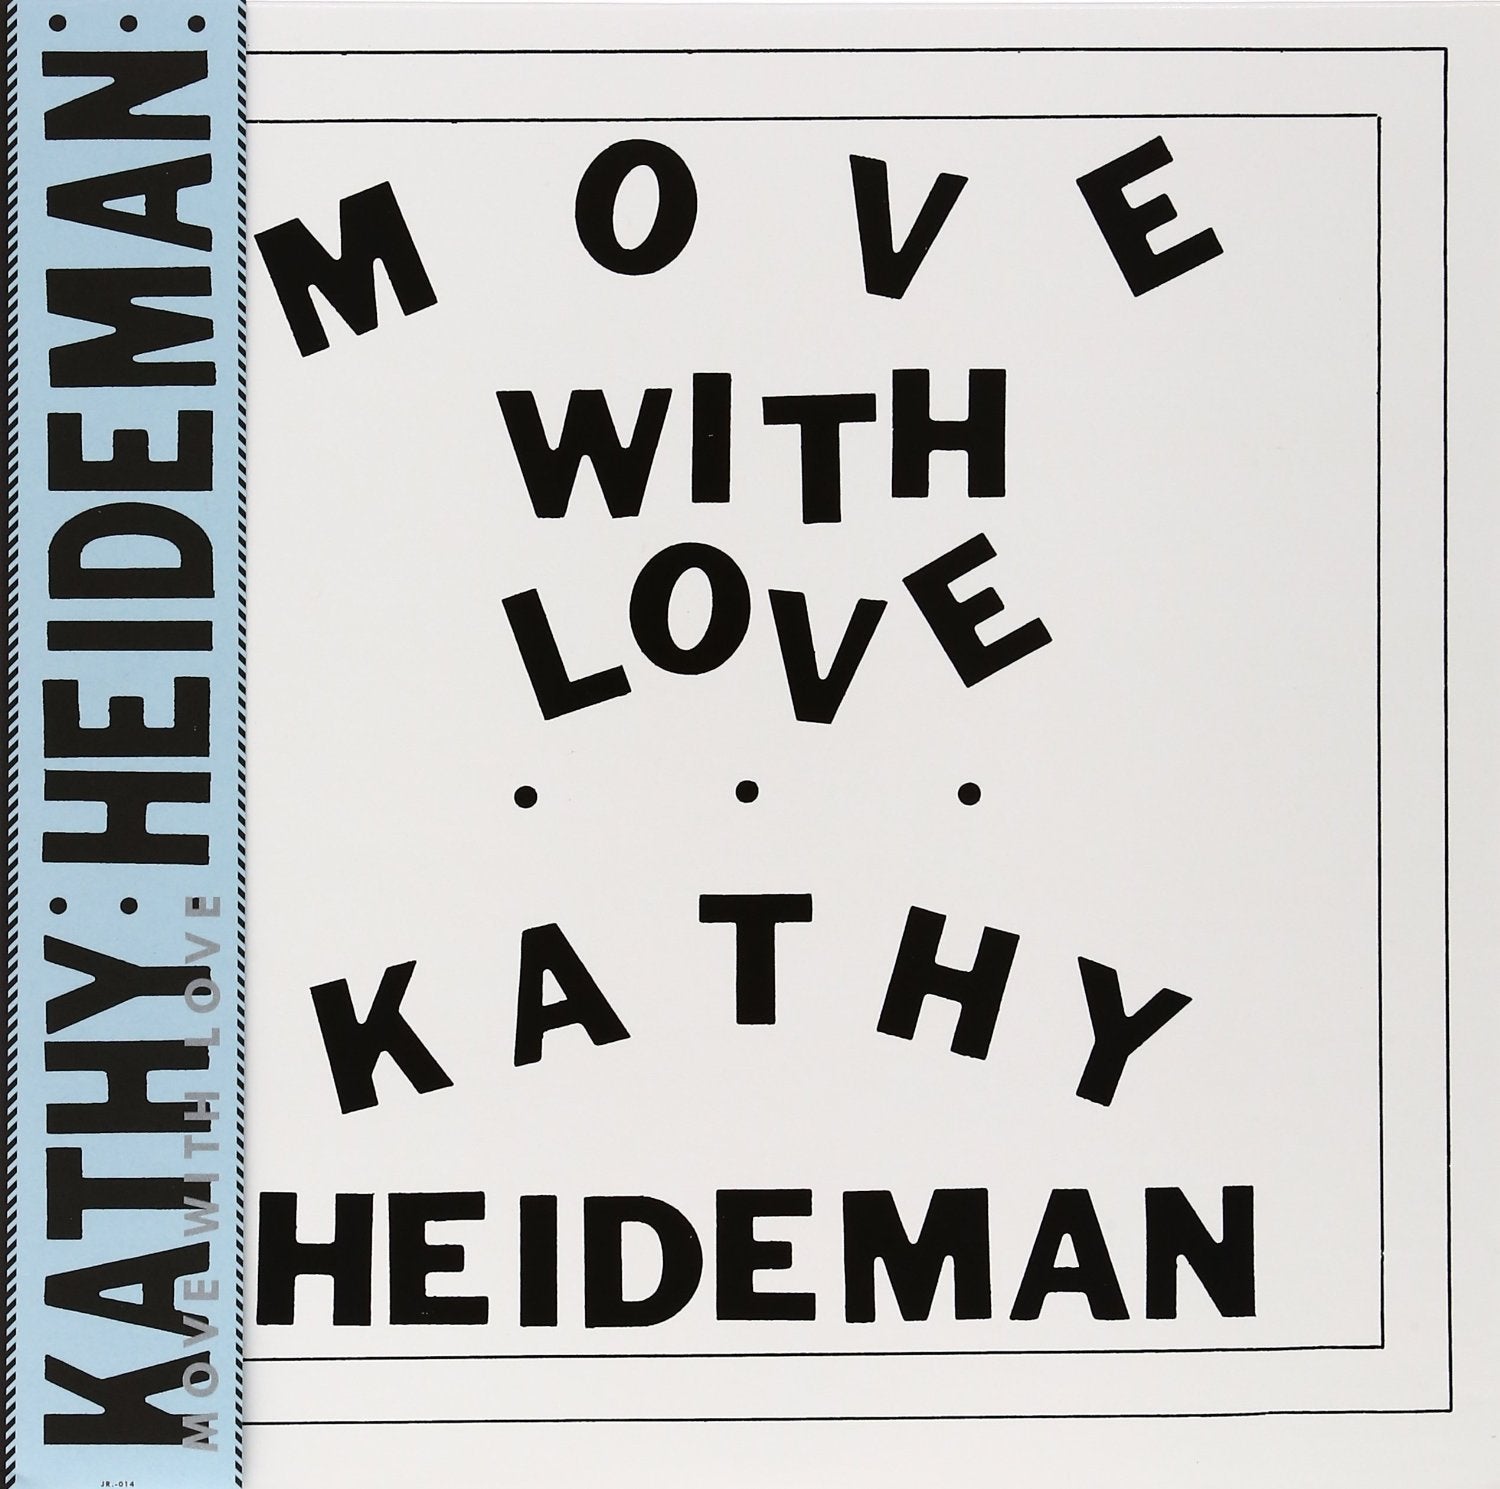 Black and white square promotional sticker with the text "Kathy Heideman - Move With Love - Seaglass Vinyl" arranged in a bold, blocky font, contained within a thick border with ruler markings by Tandem Coffee Roasters.